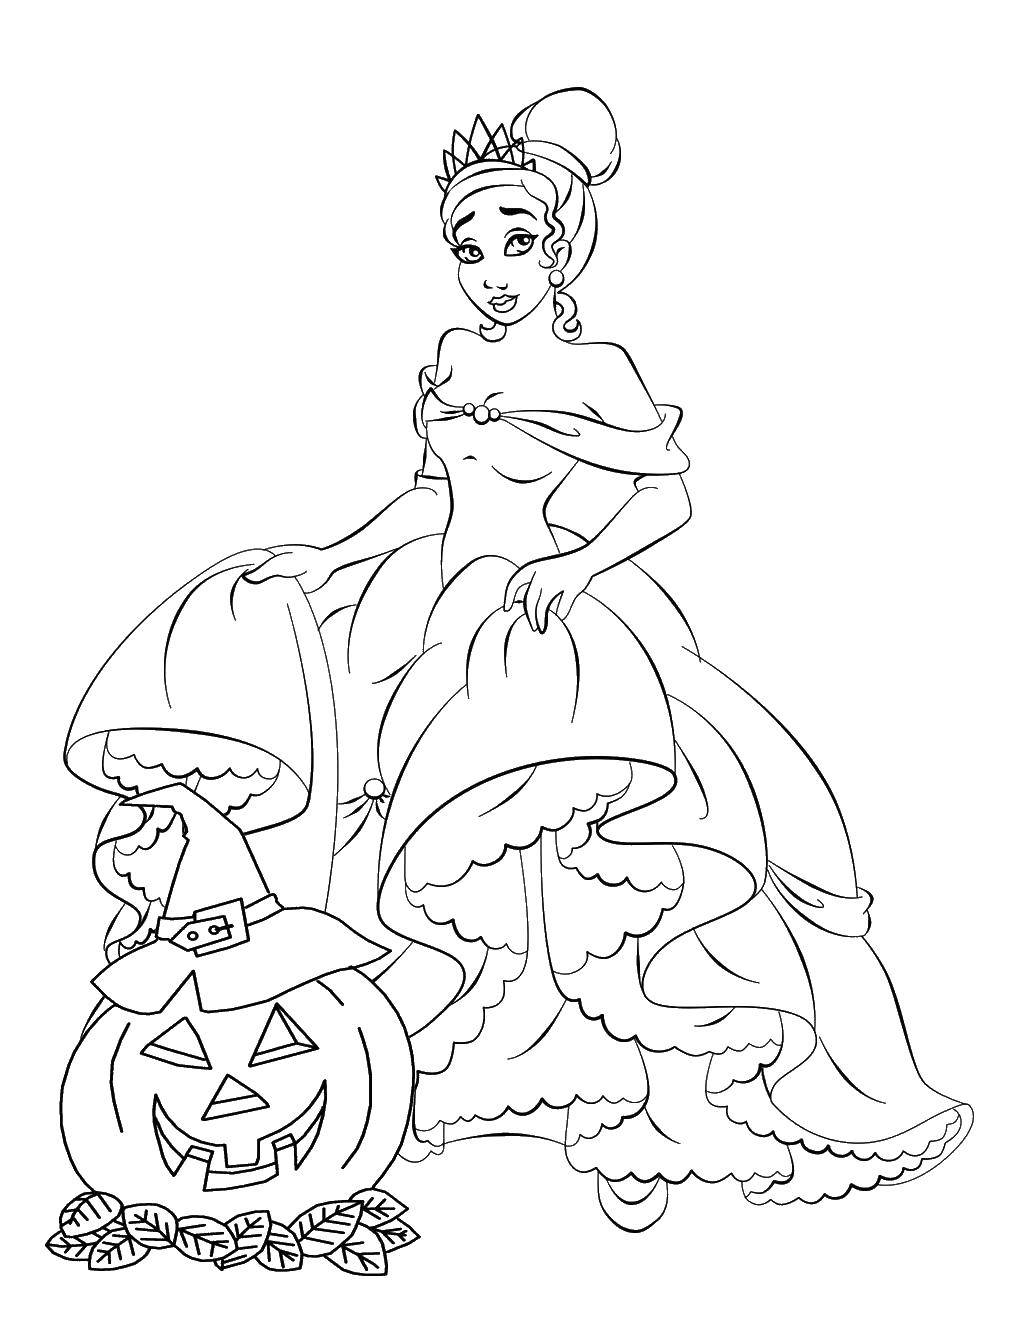 Coloring The Princess and the pumpkin. Category Halloween. Tags:  Halloween, pumpkin, Princess, dress.